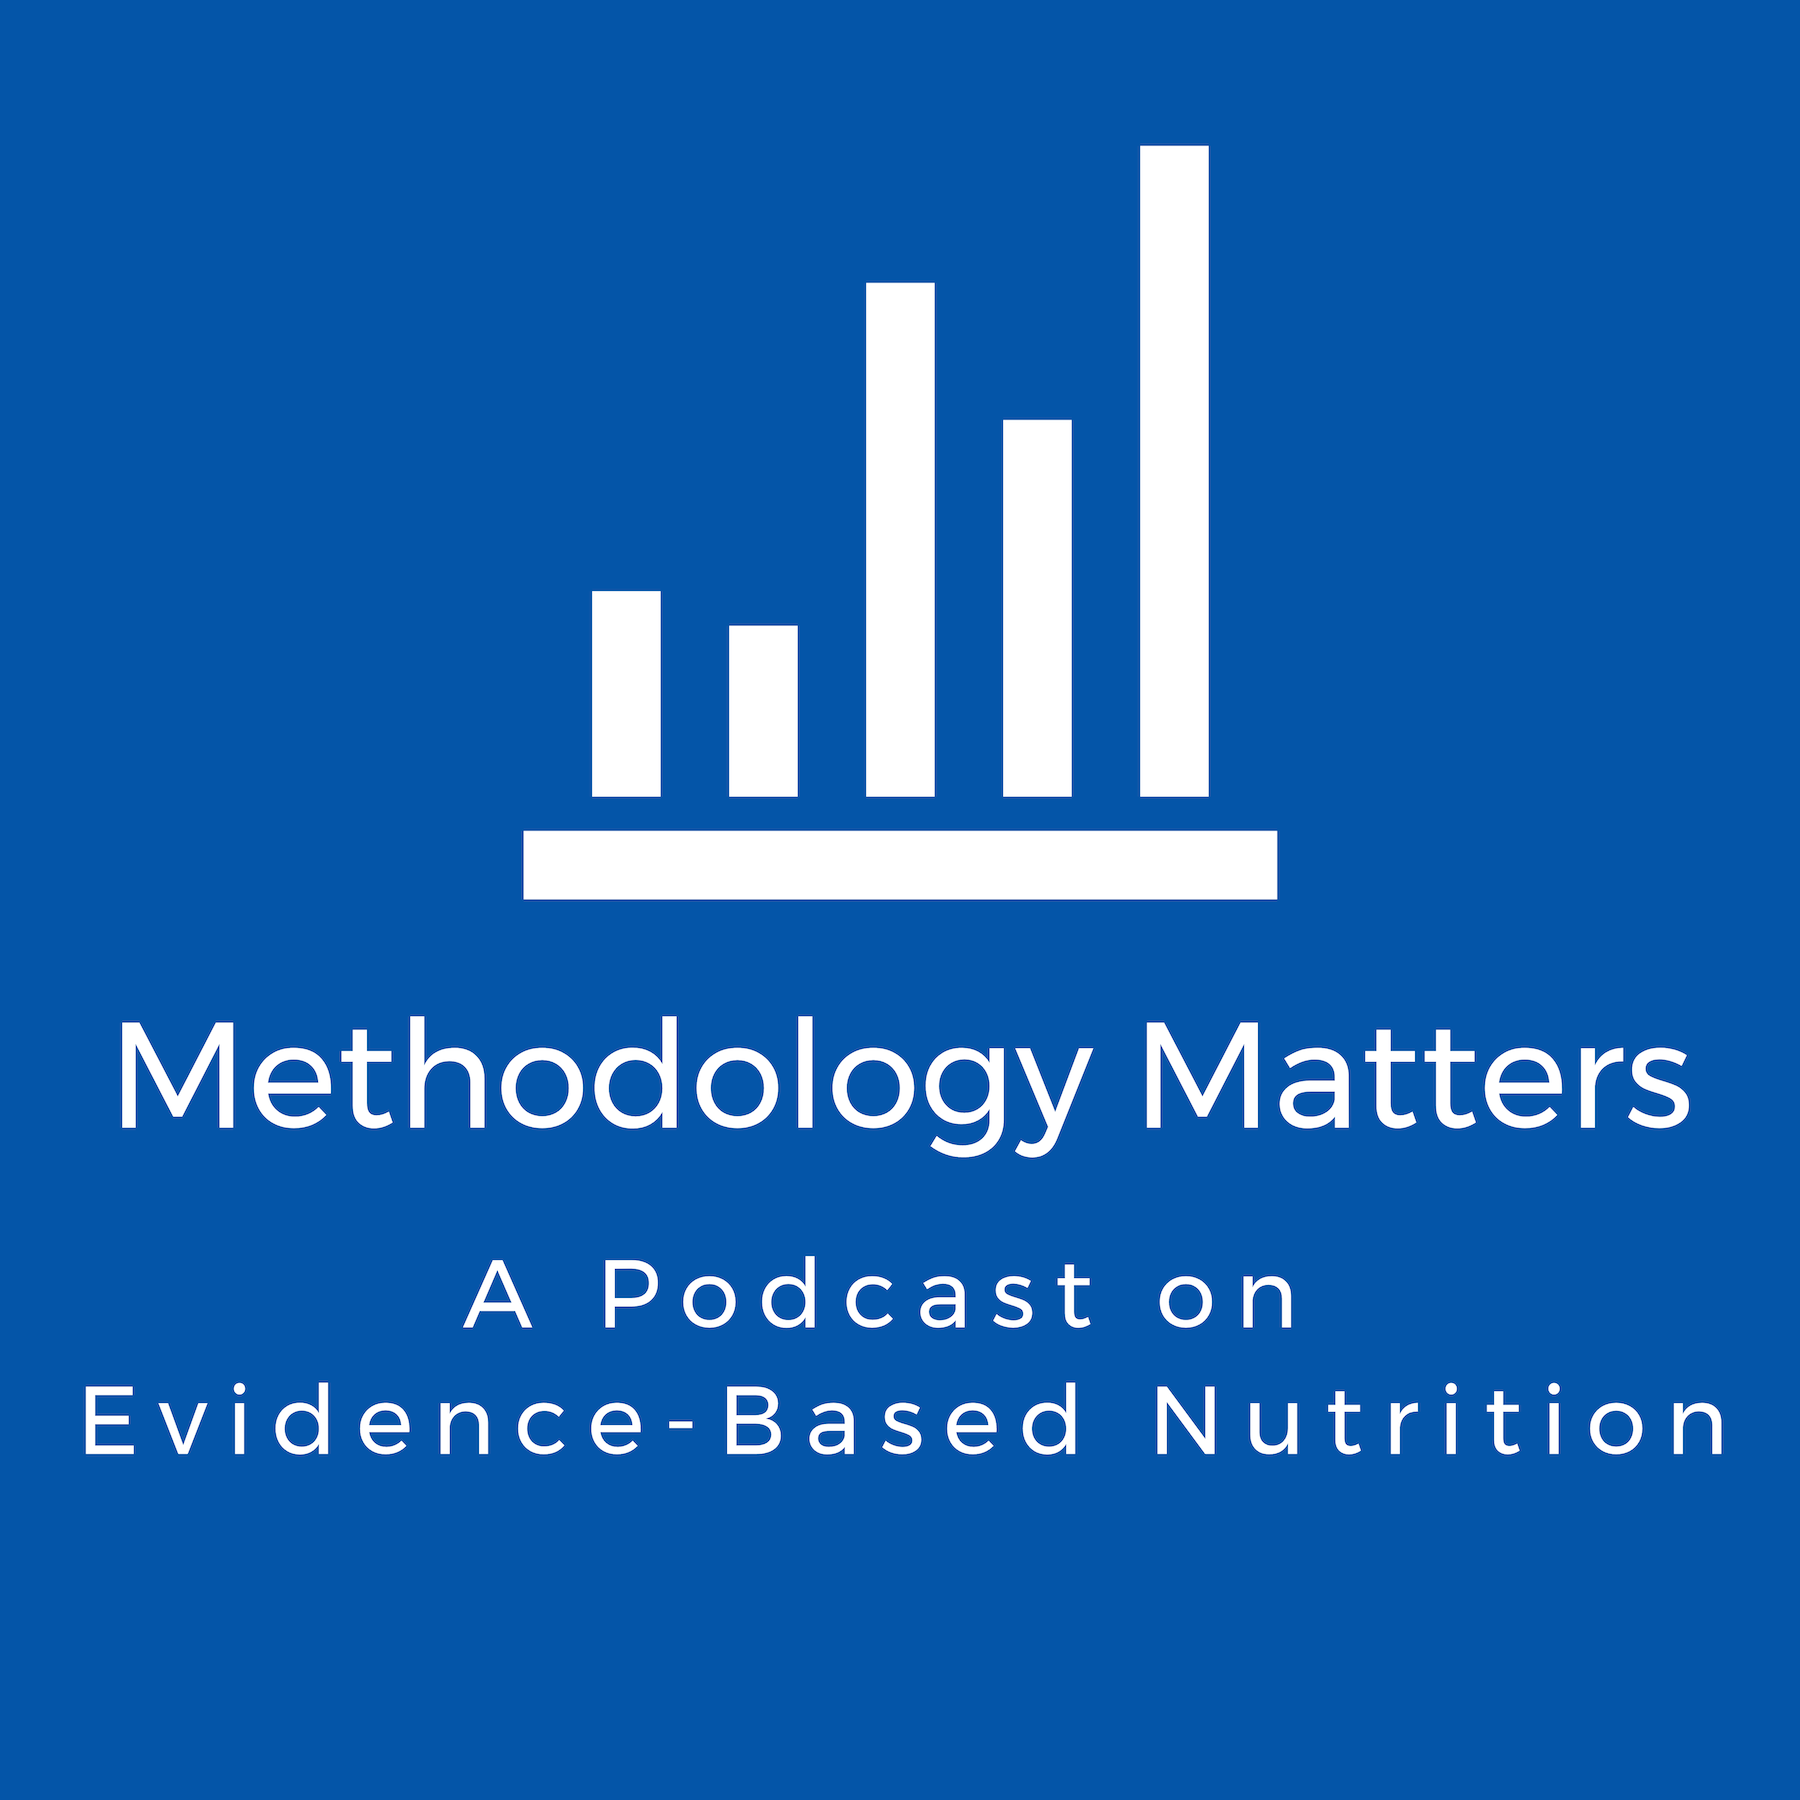 Methodology Matters — A Podcast on Evidence-Based Nutrition